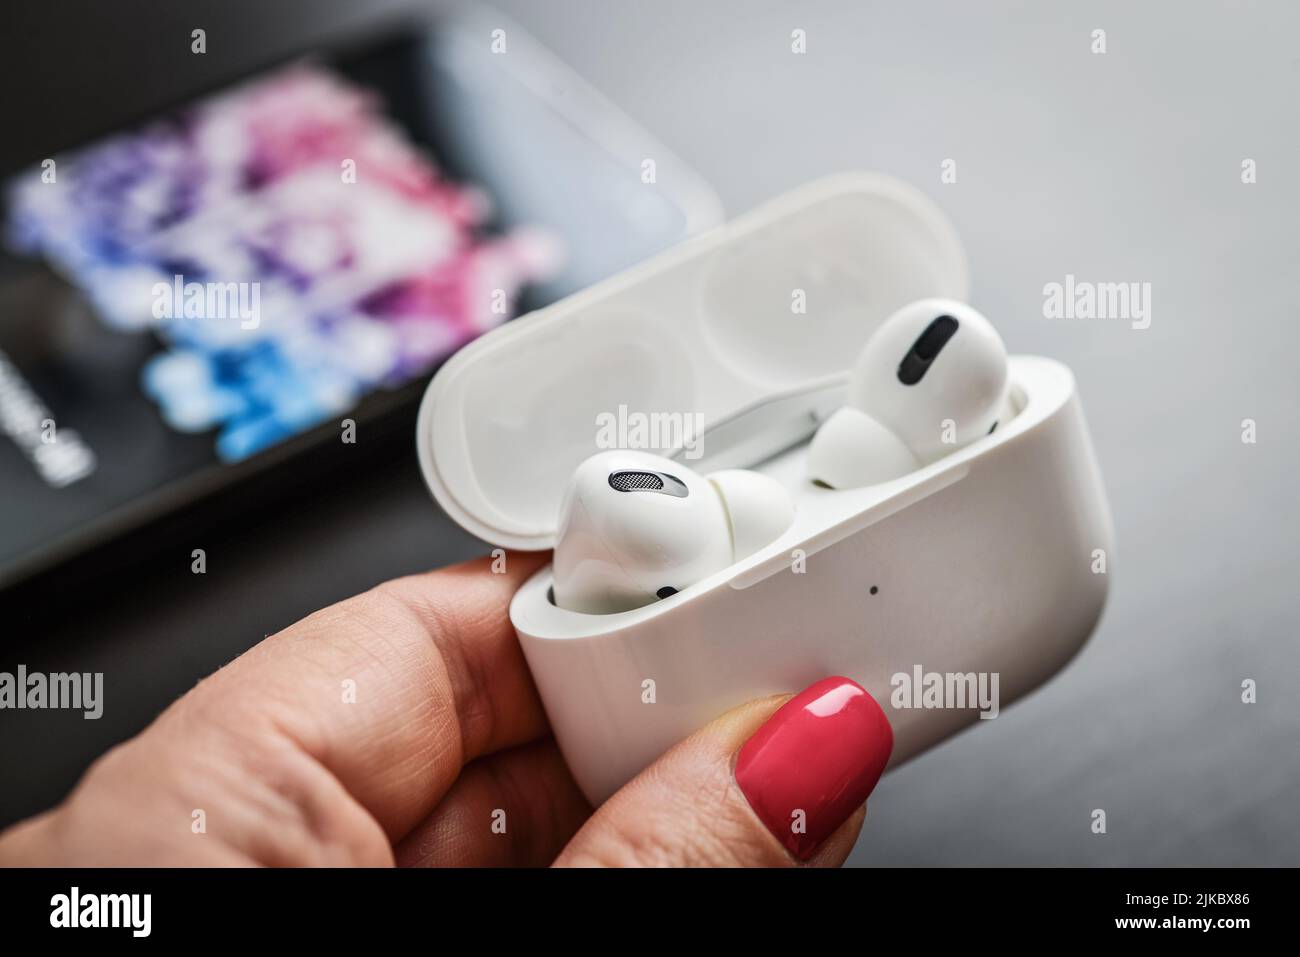 KIEV, UKRAINE - FEBRUARY 10, 2022:  Charging case with AirPods Pro headphones  and the new iPhone 13 Pro with Apple music app on screen Stock Photo